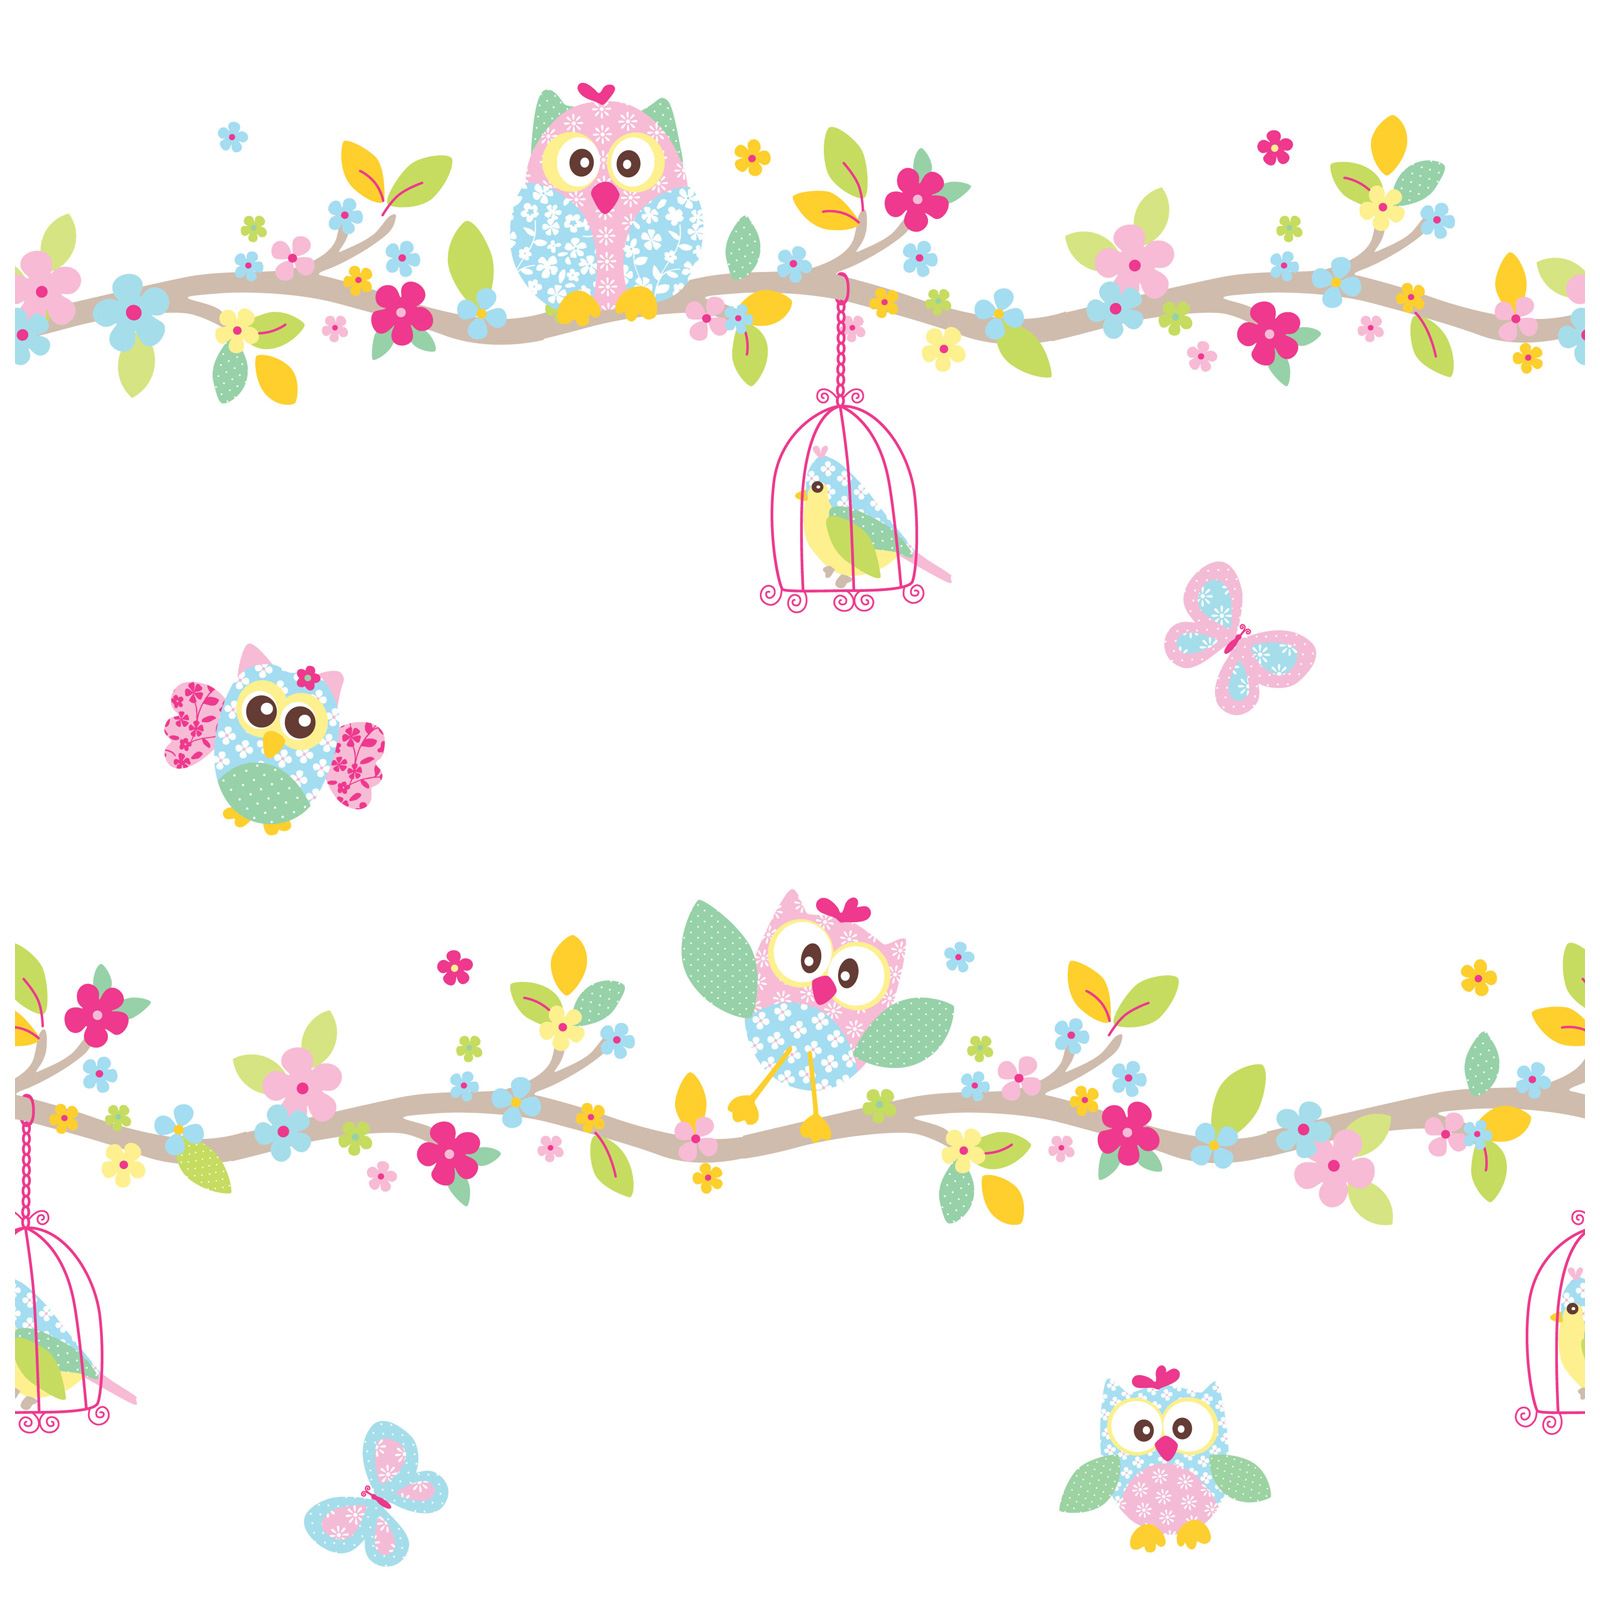 Patchwork Owl Wallpaper And Border White Pink Pastel Bedroom Nursery